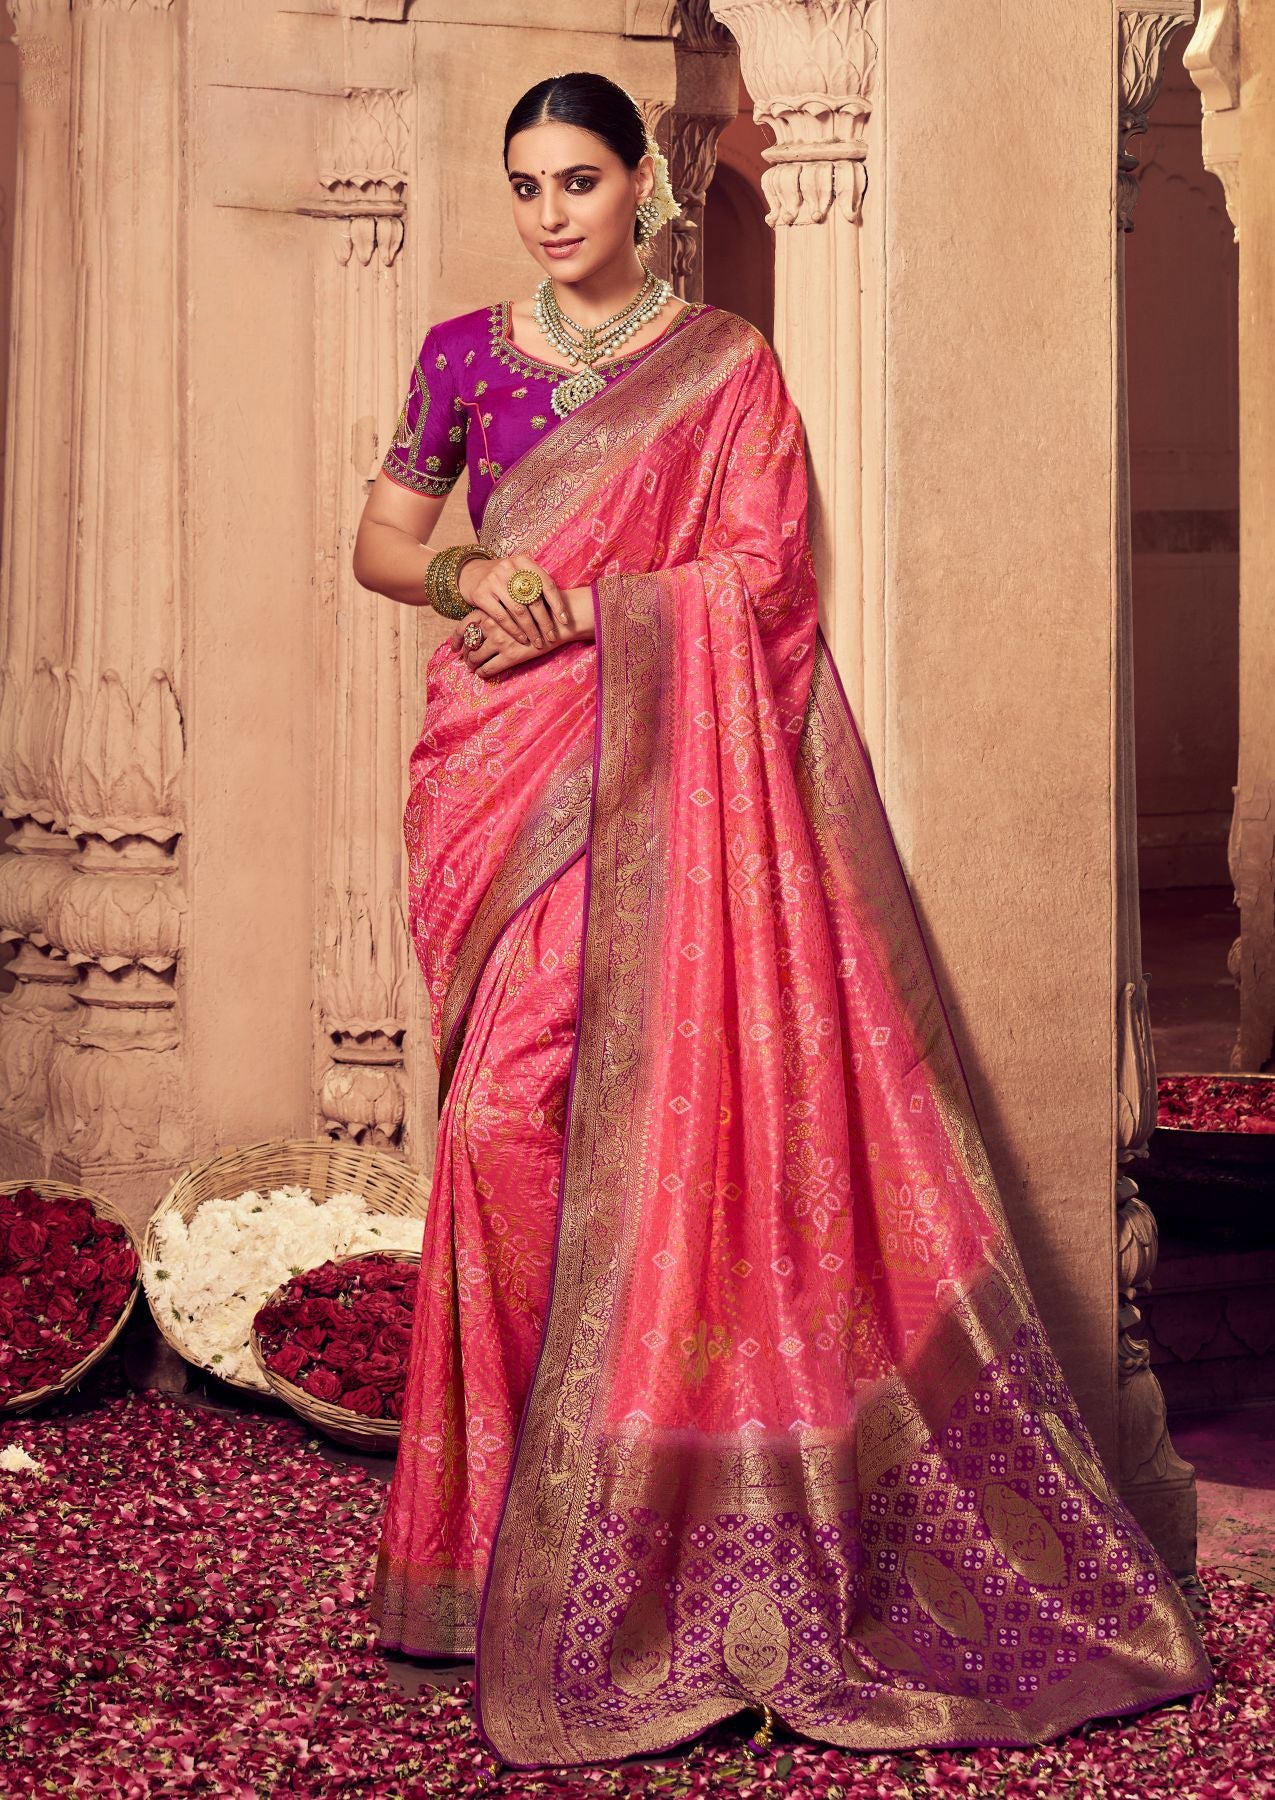 Elegant Pink Dola Silk Saree: A Fusion of Grace and Glamour